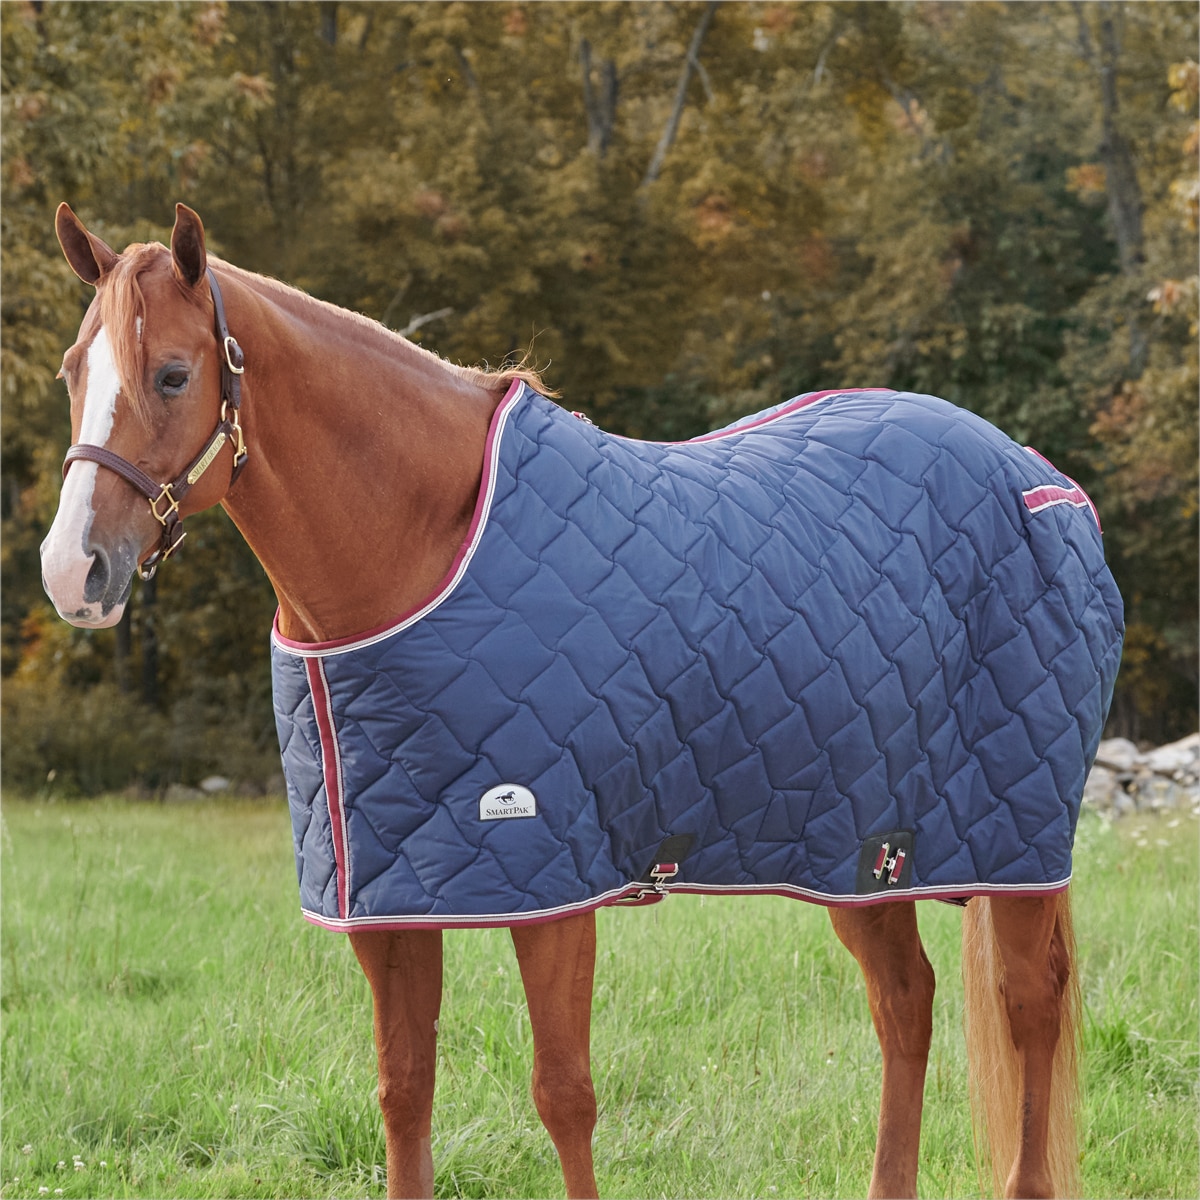 NEW 72” COTTON THERMAL NAVY RED PLAID HORSE SHEET WARM BARN BLANKET COOLER LINER 